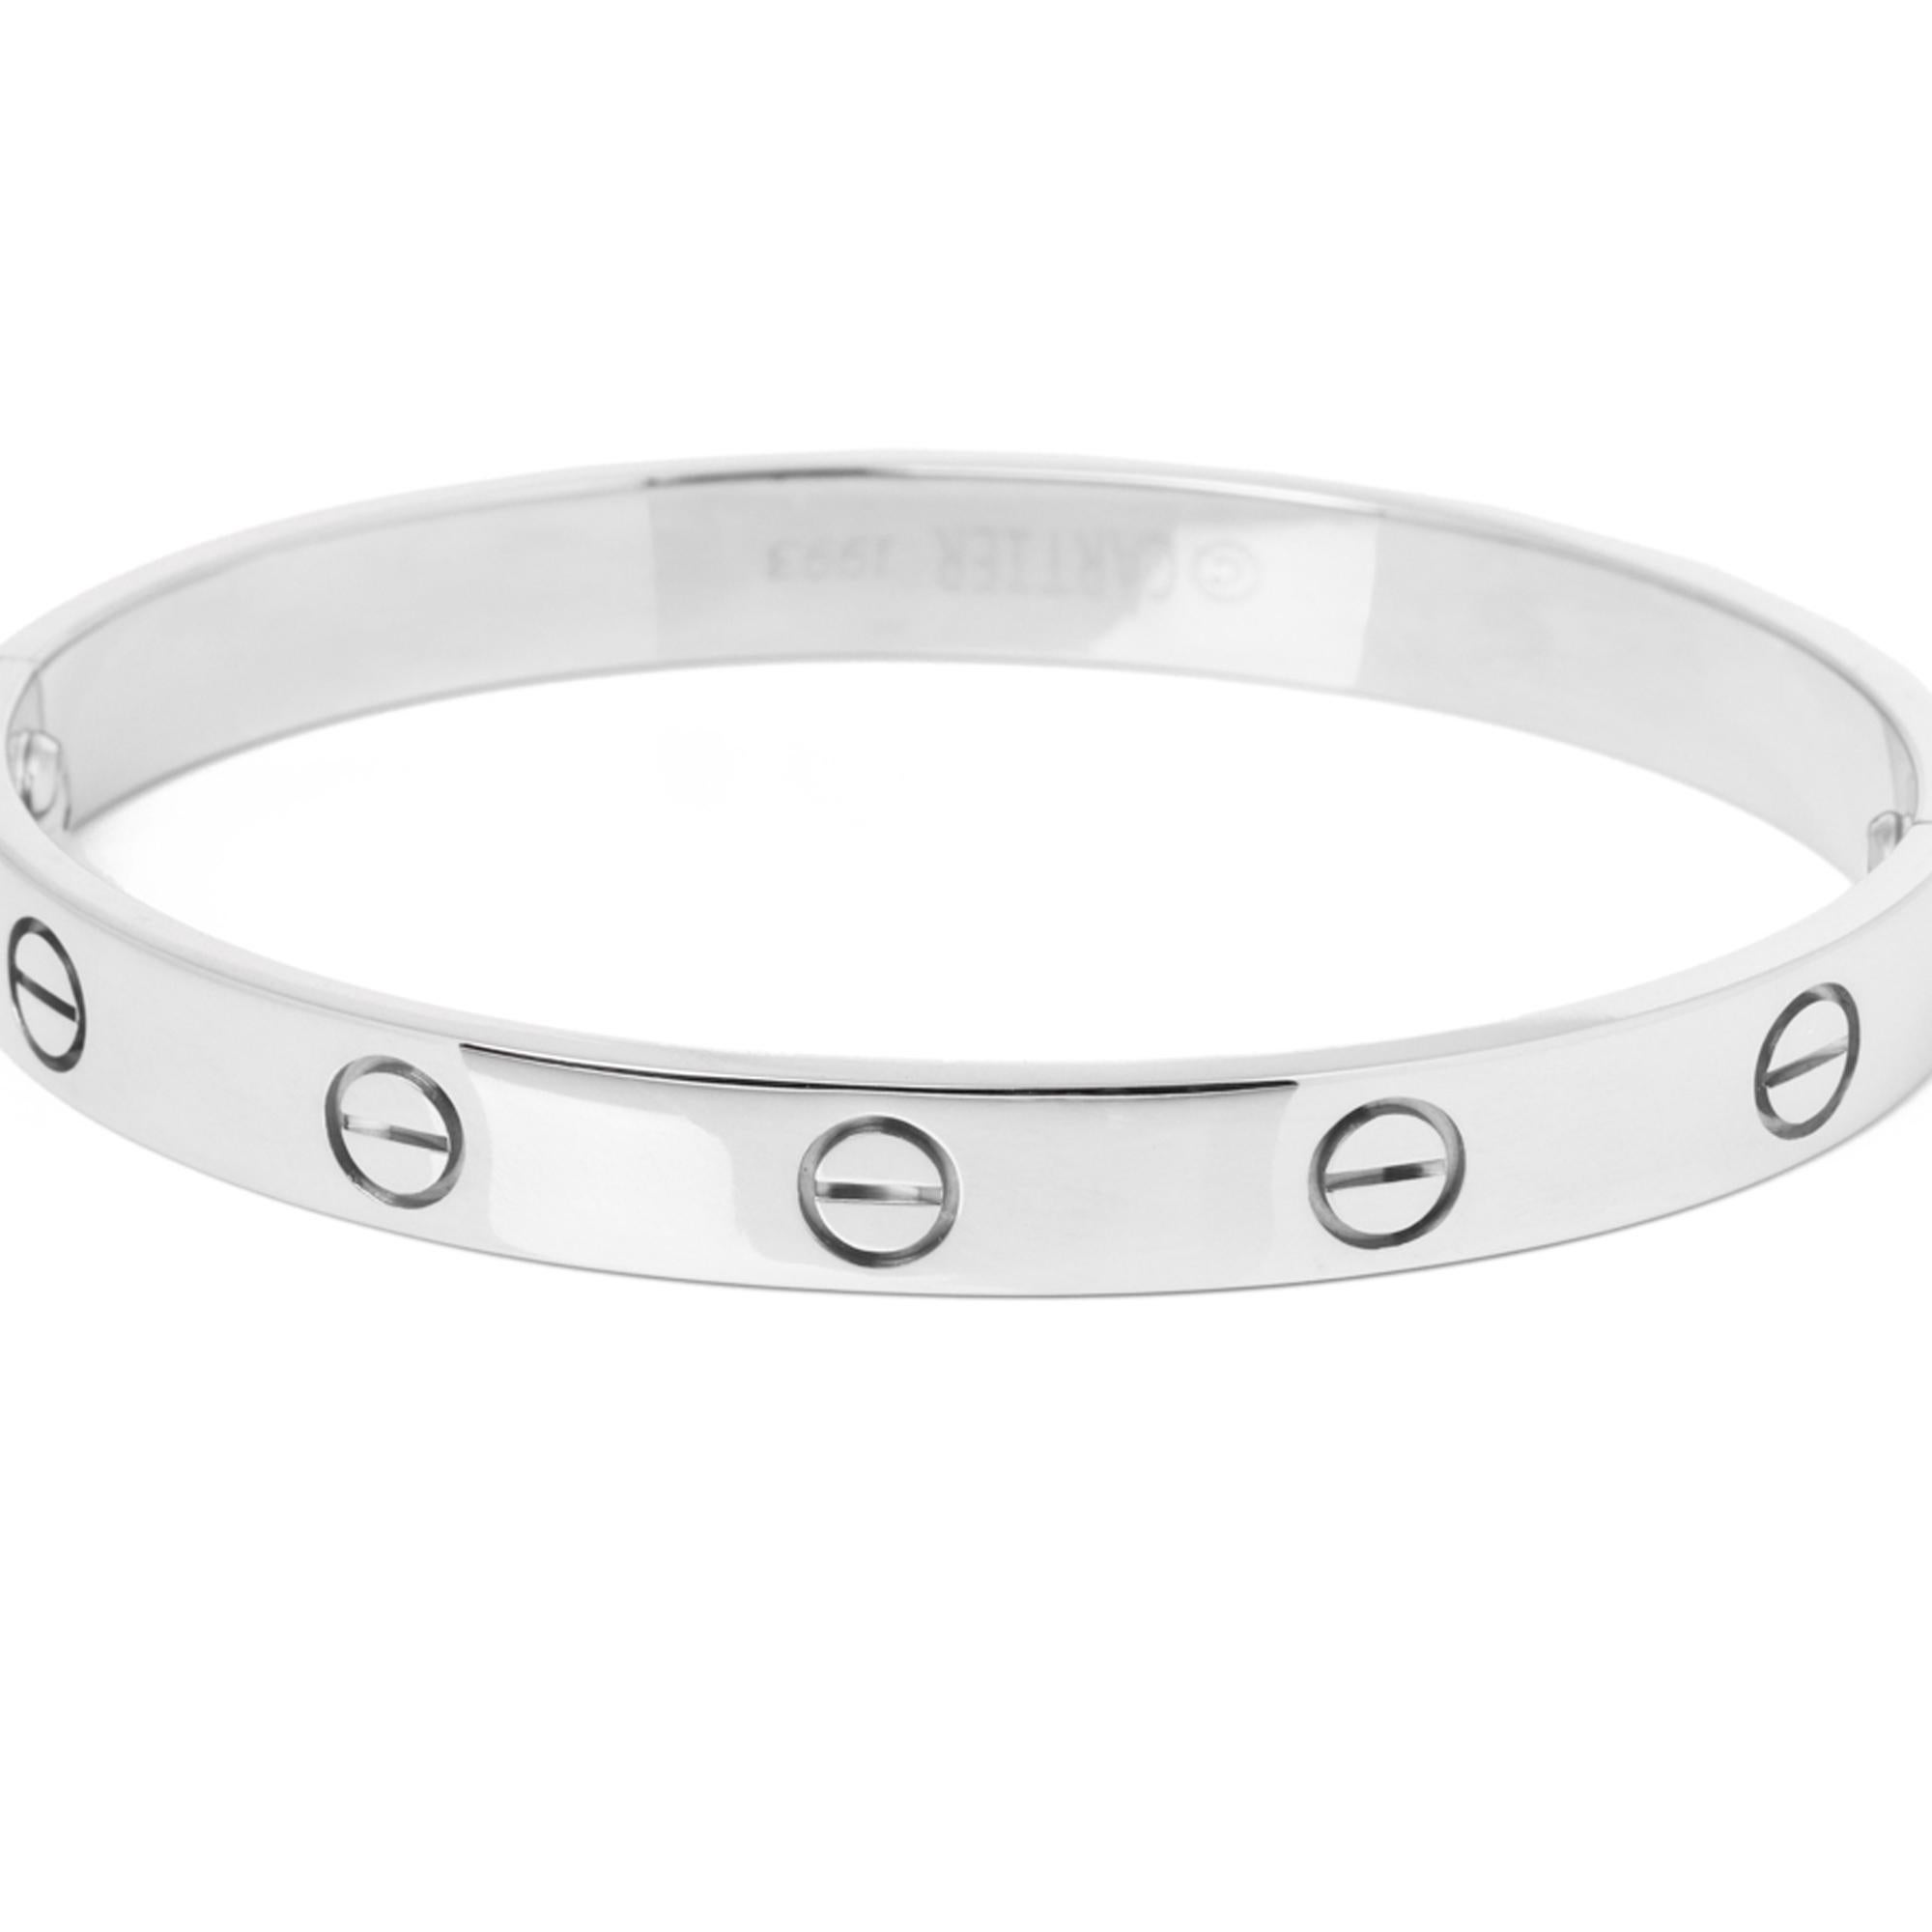 Cartier 18ct White Gold Love Bangle

Brand- Cartier
Model- Love Bangle
Product Type- Bracelet
Serial Number- AO****
Accompanied By- Cartier Pouch, Service Papers, Screwdriver
Material(s)- 18ct White Gold

Bracelet Length- 16cm
Bracelet Width-